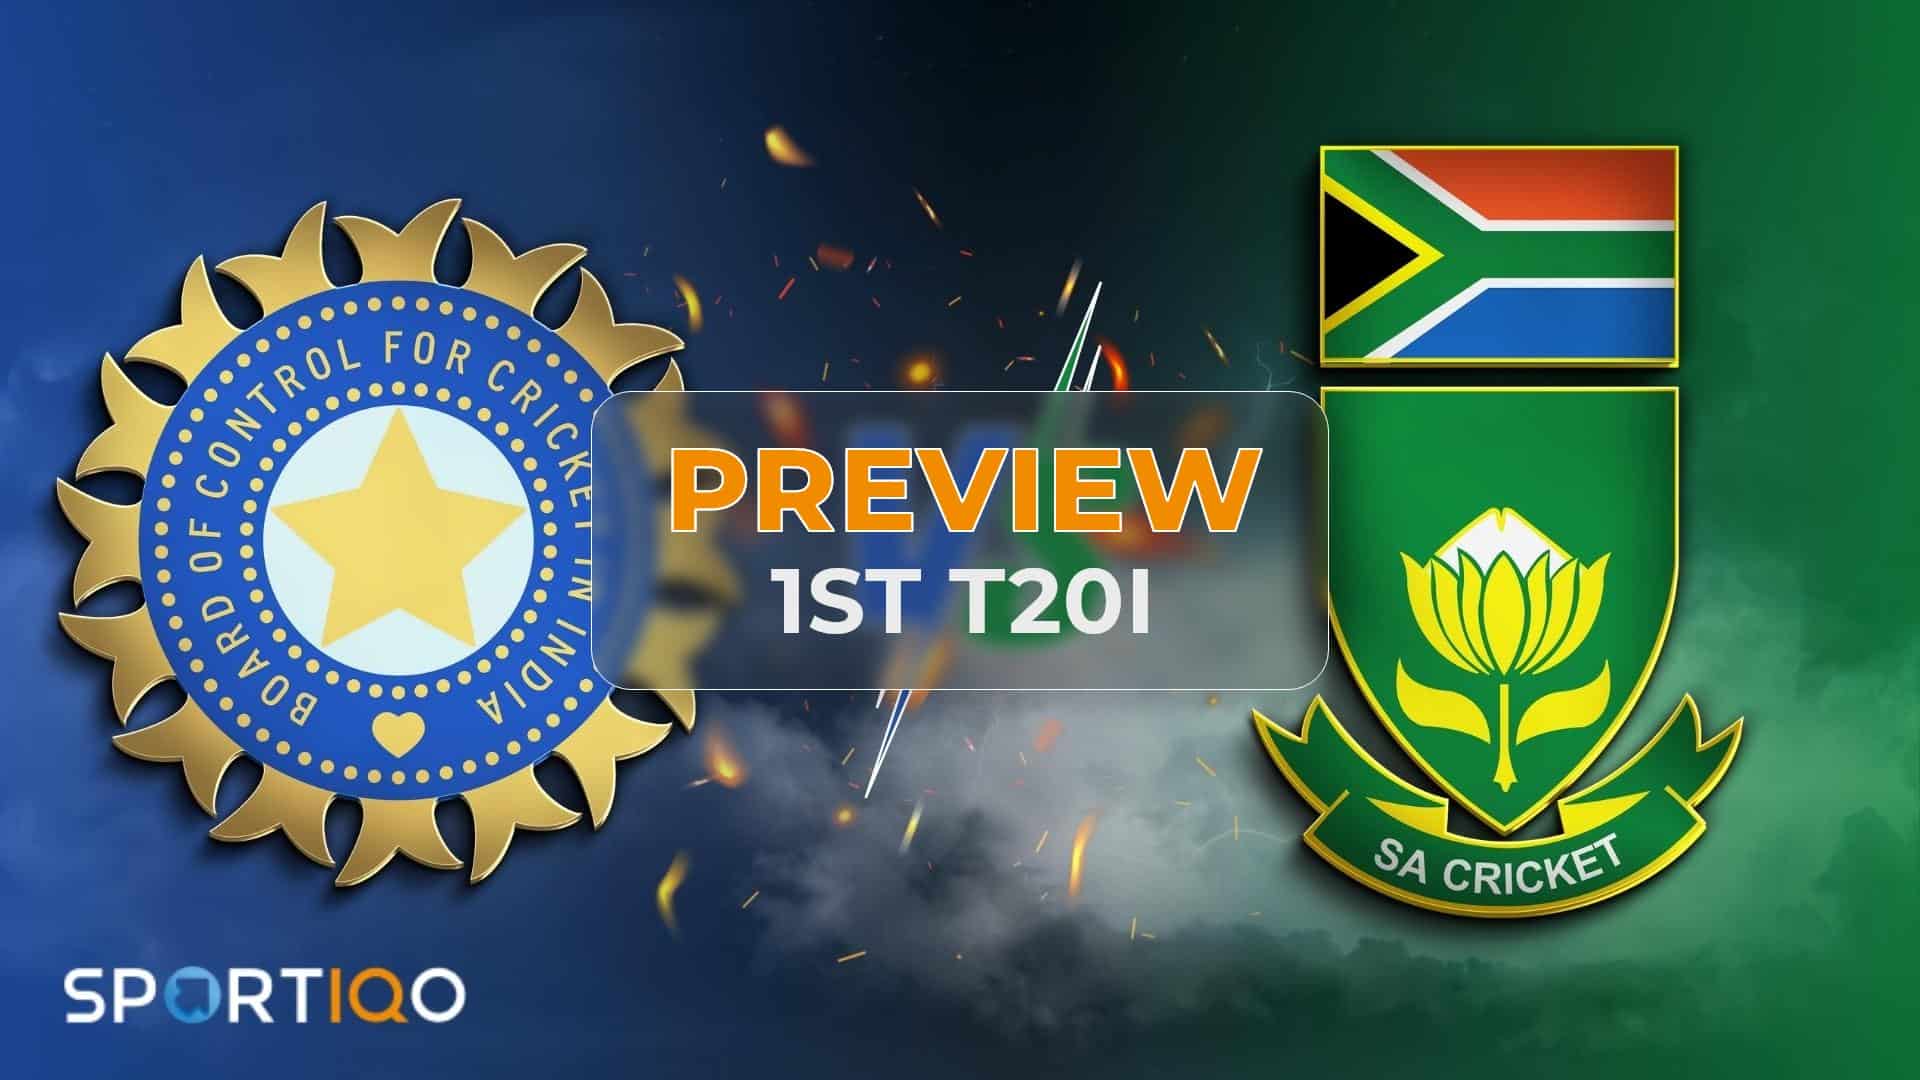 India South Africa Series 1st T20I Preview